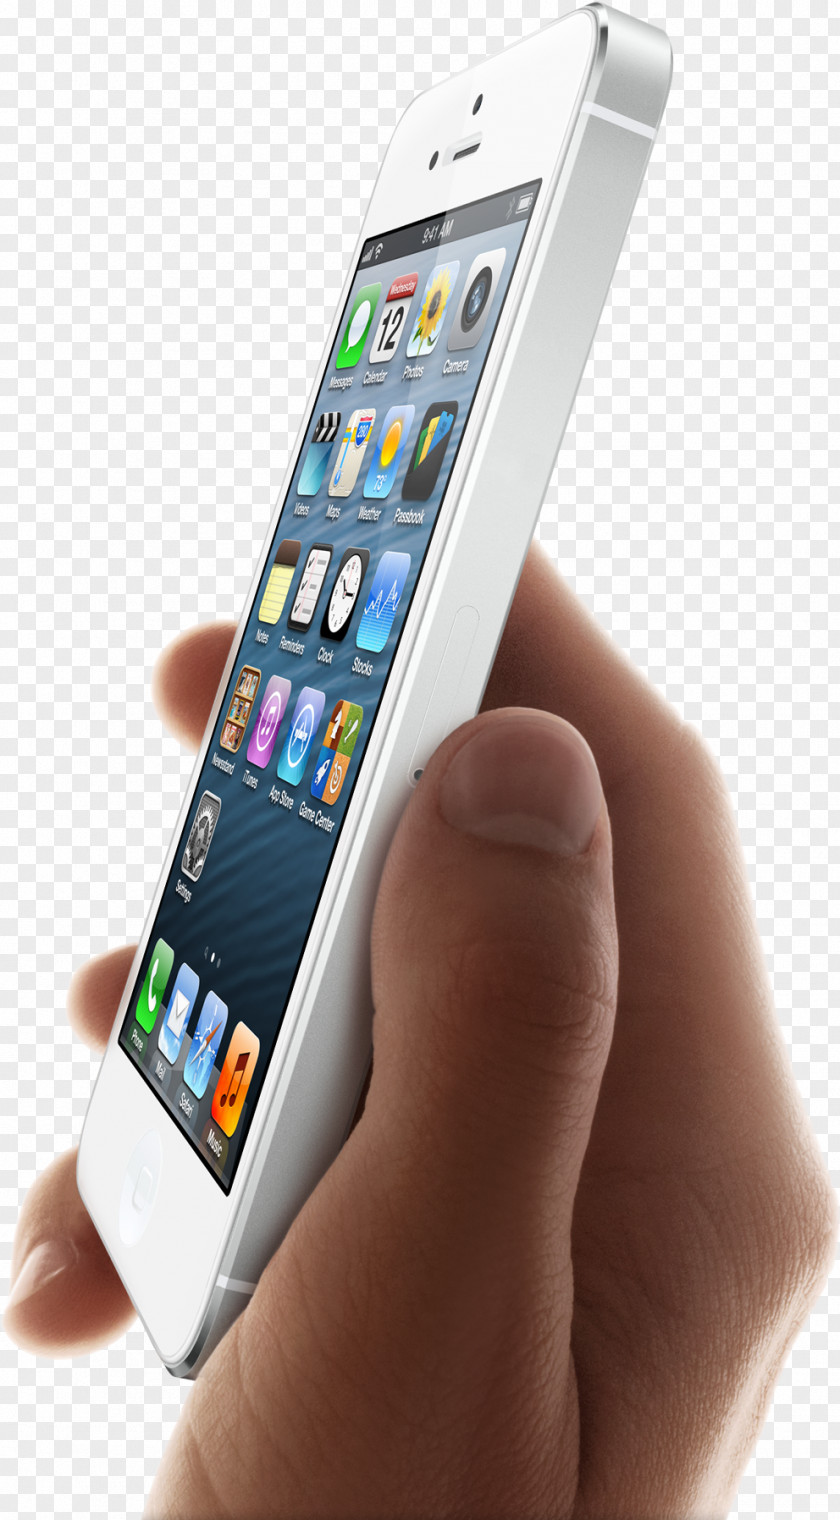 Iphone IPhone 5 4S Smartphone Apple PNG